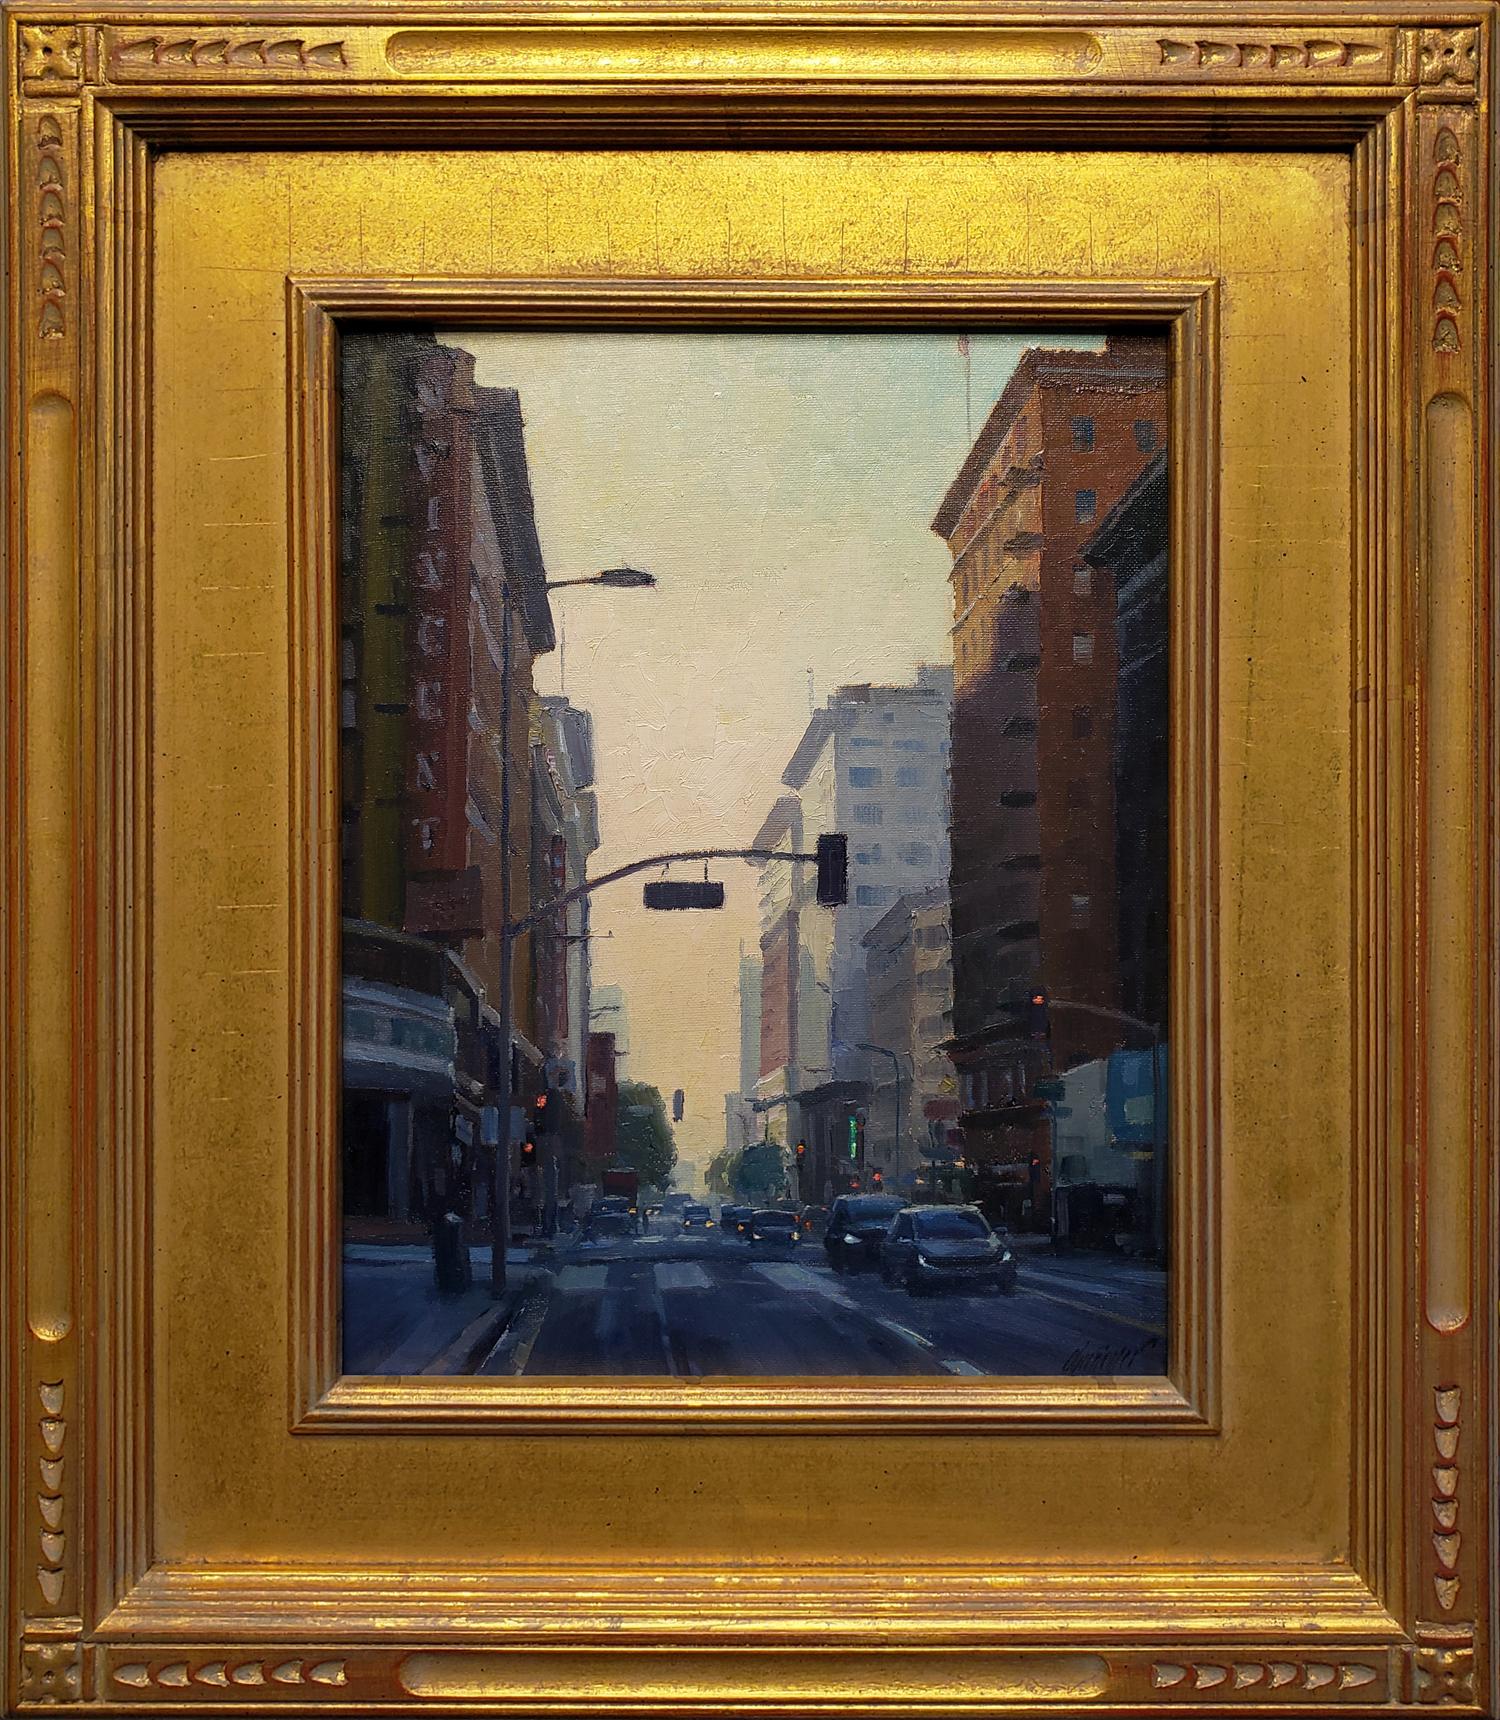 Seventh and Hill, Los Angeles - Painting by Michael Obermeyer